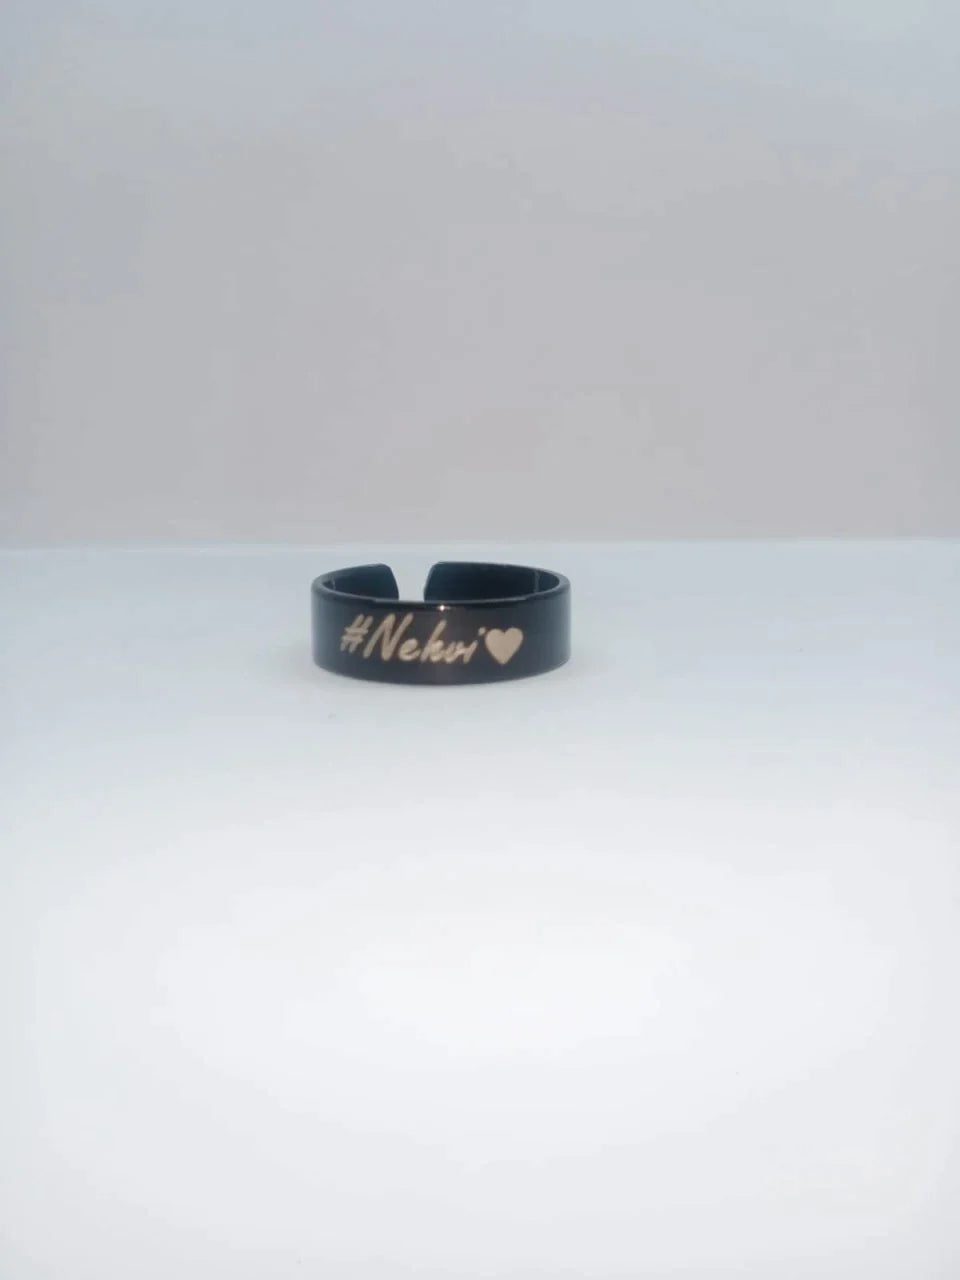 Add a piece of exquisite aesthetic jewelry and mark your bond forever with this stylish customized ring